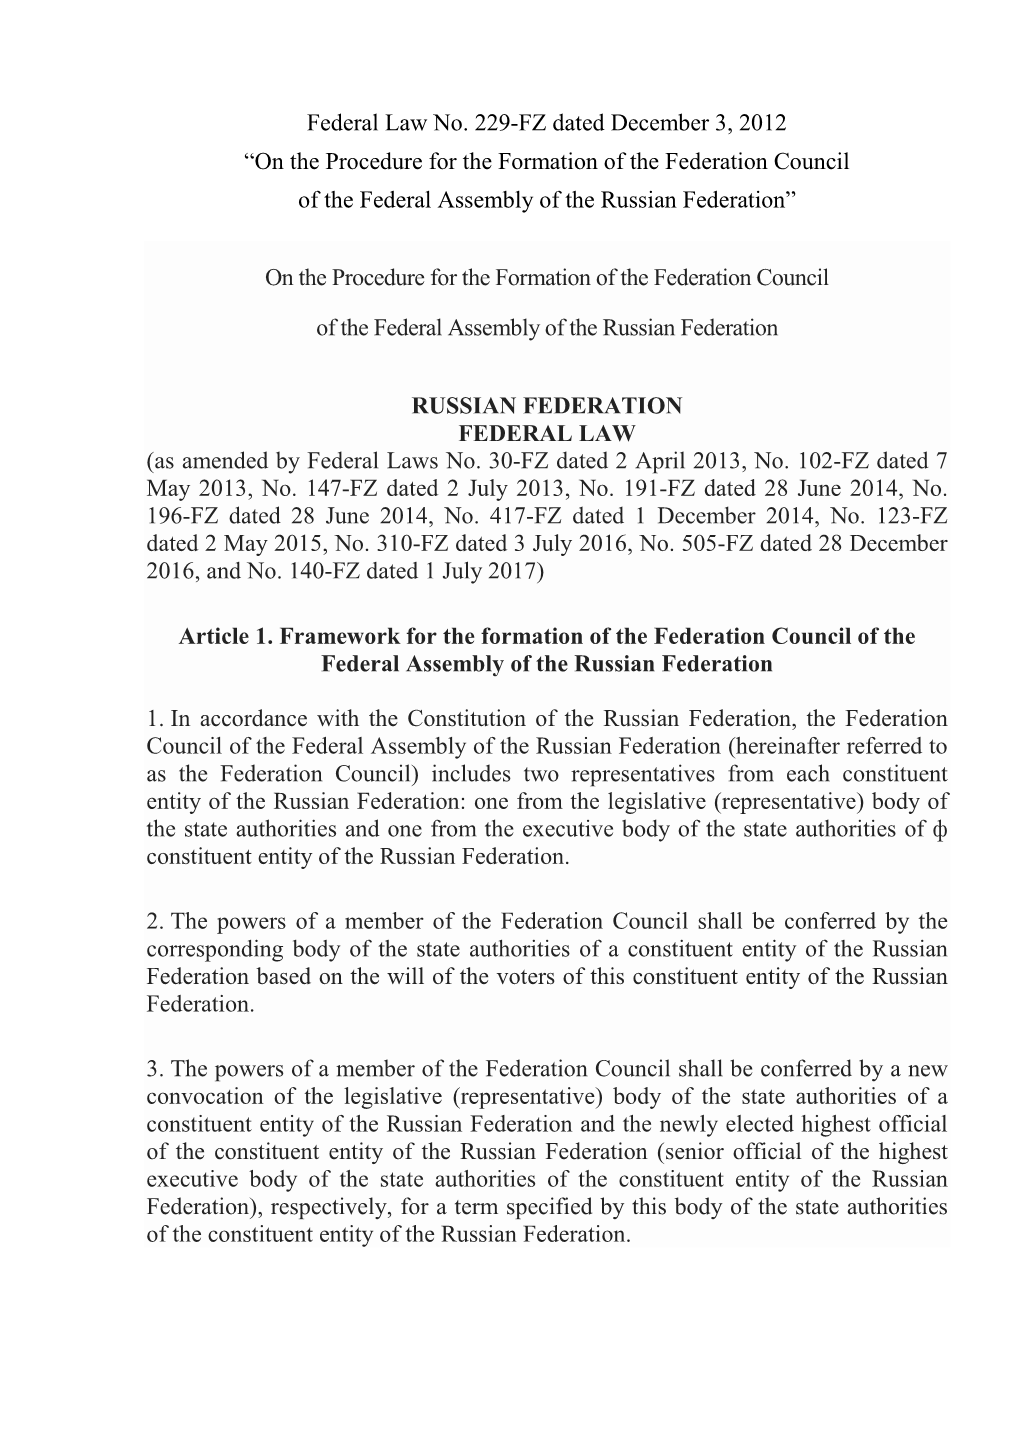 Federal Law No. 229-FZ Dated December 3, 2012 “On the Procedure for the Formation of the Federation Council of the Federal Assembly of the Russian Federation”